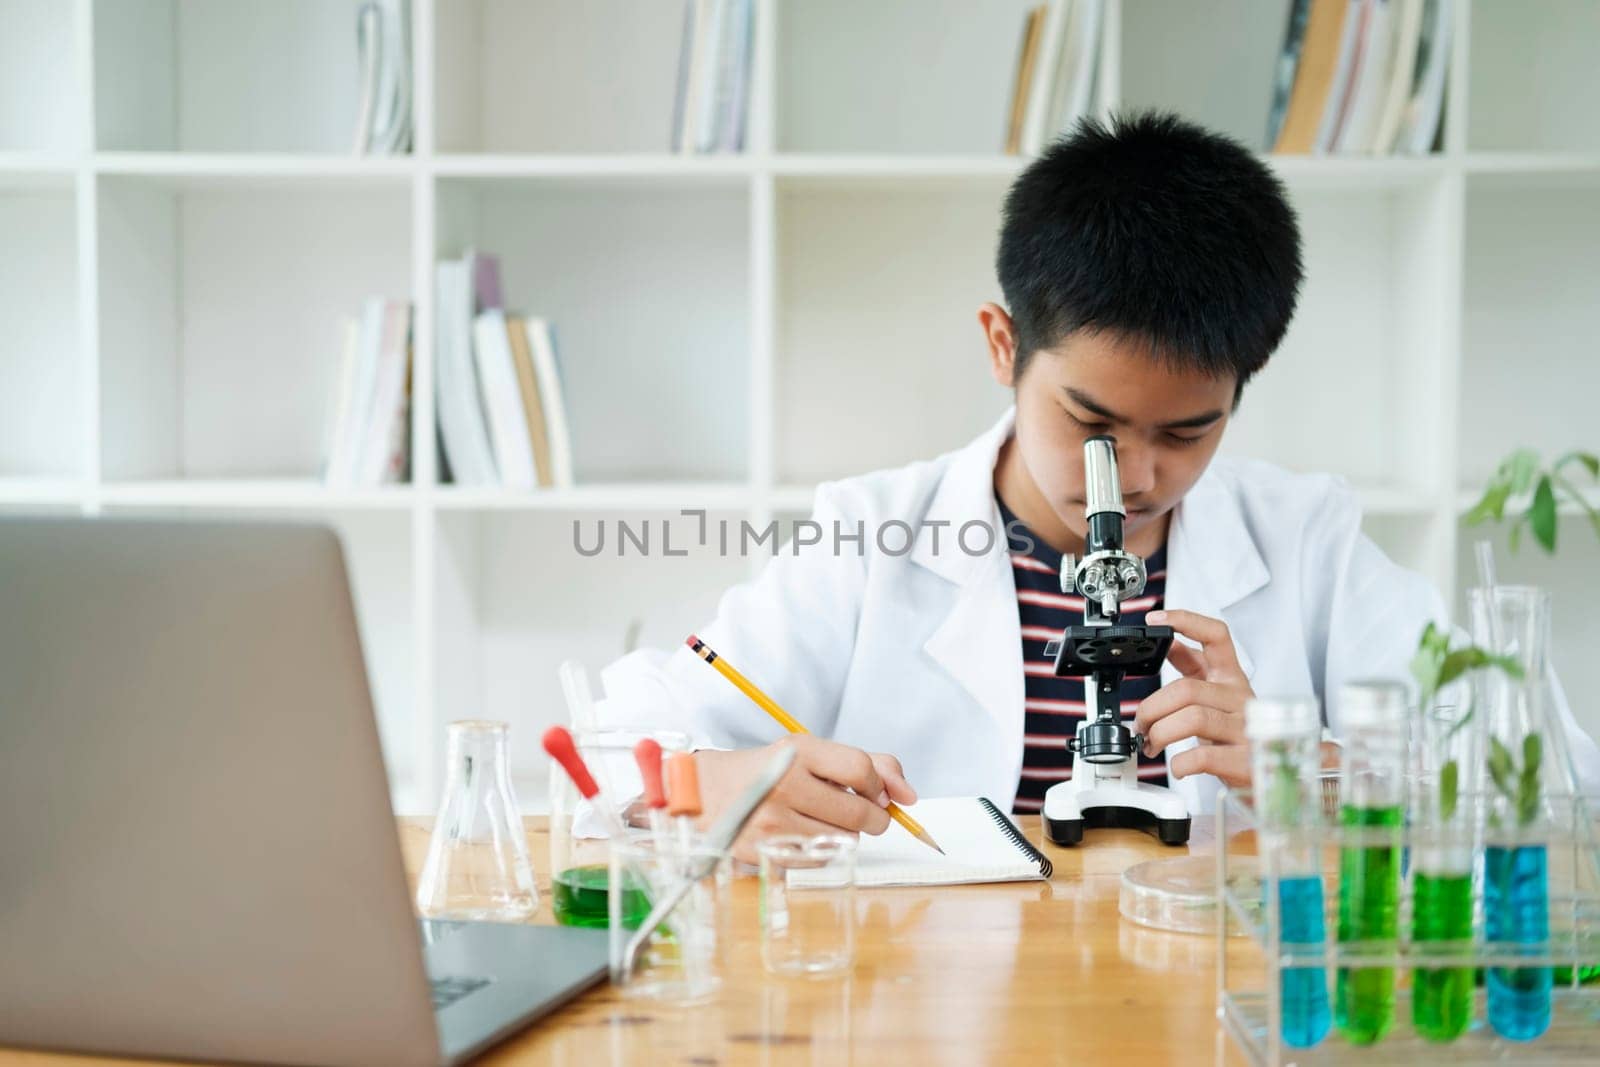 Young elementary schoolboy concentrates on his science project, exploring the world through a microscope. This image captures the essence of education, curiosity, and hands-on learning. Ideal for STEM, science education, and academic-themed projects.